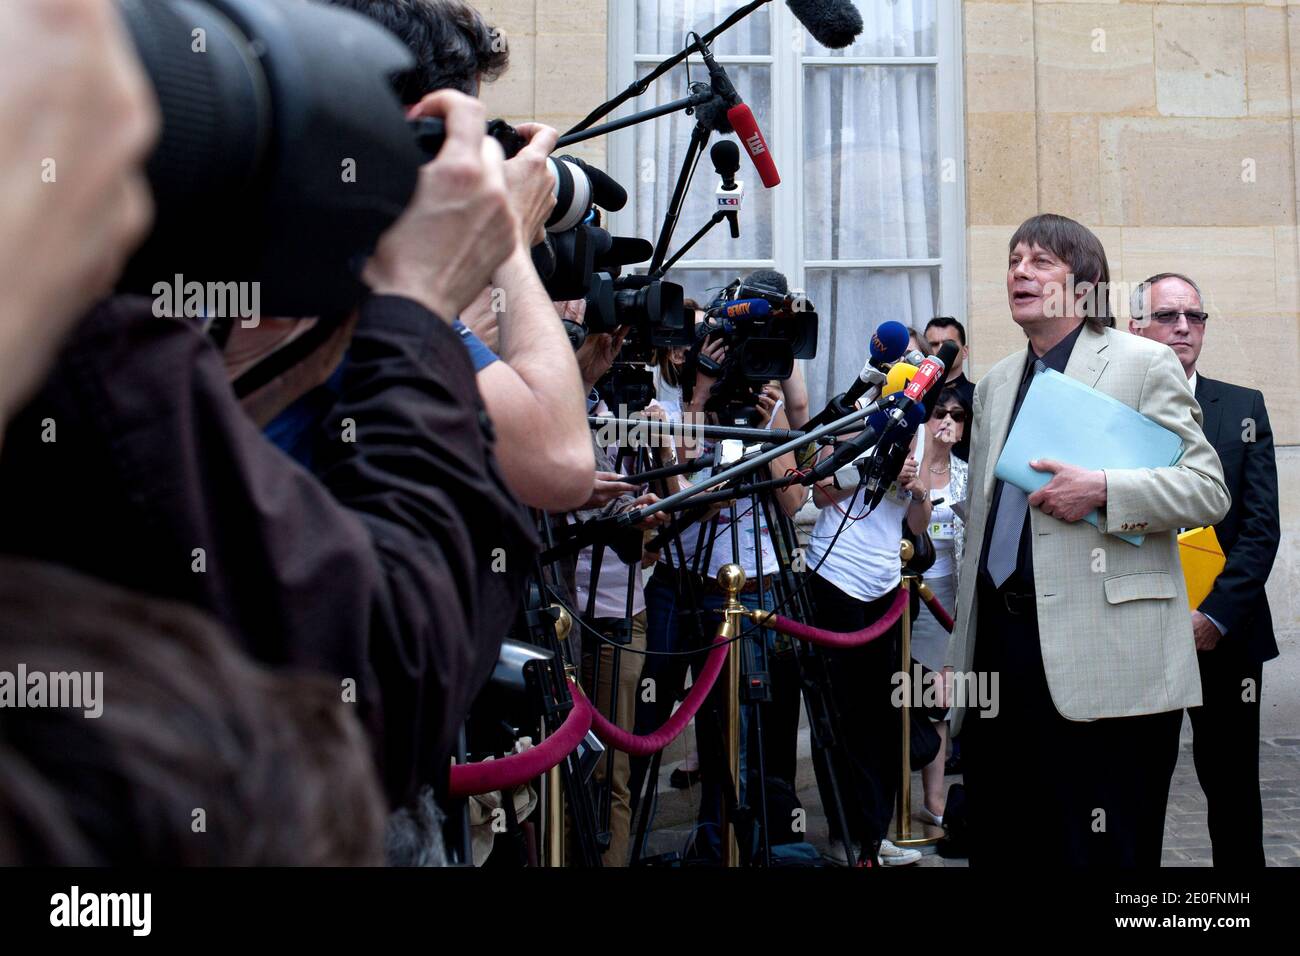 CGT labour union leader Bernard Thibault flanked by Eric Aubin answers to medias after a meeting with French Prime Minister, Jean-Marc Ayrault, at the Hotel Matignon, in Paris, France on May 29, 2012. Photo by Stephane Lemouton/ABACAPRESS.COM. Stock Photo